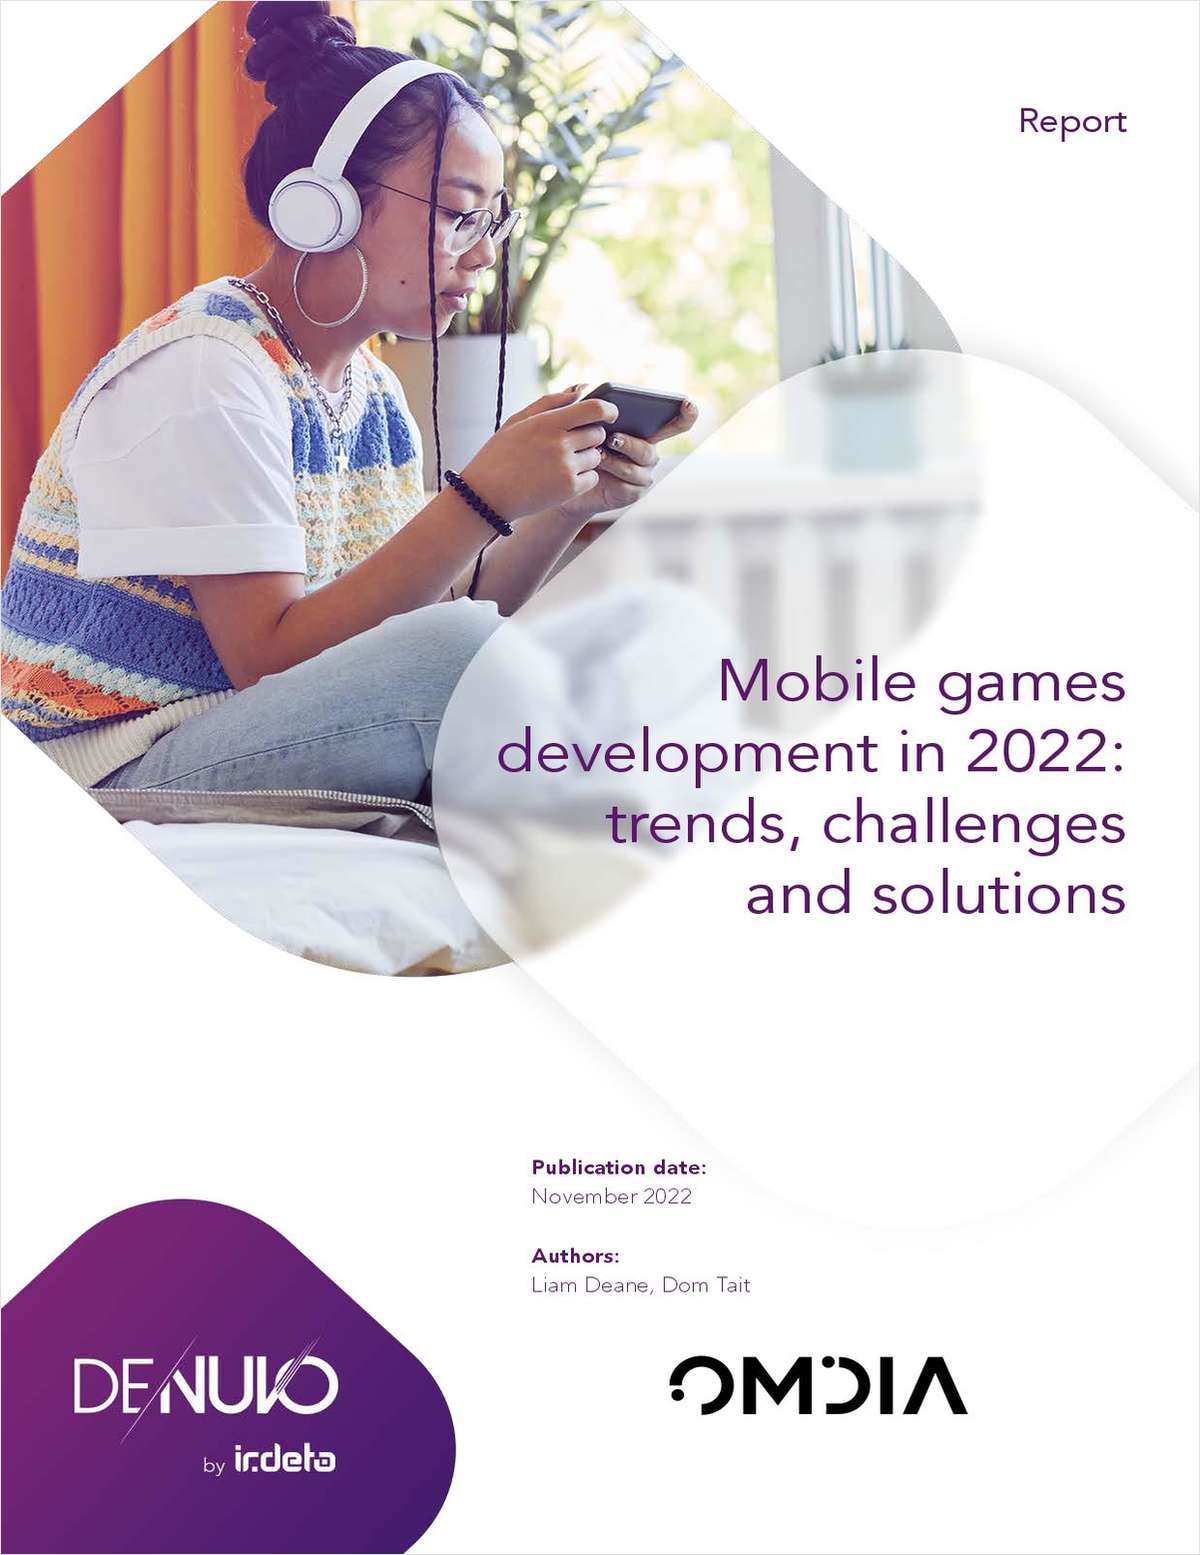 Mobile games development in 2022: trends, challenges and solutions